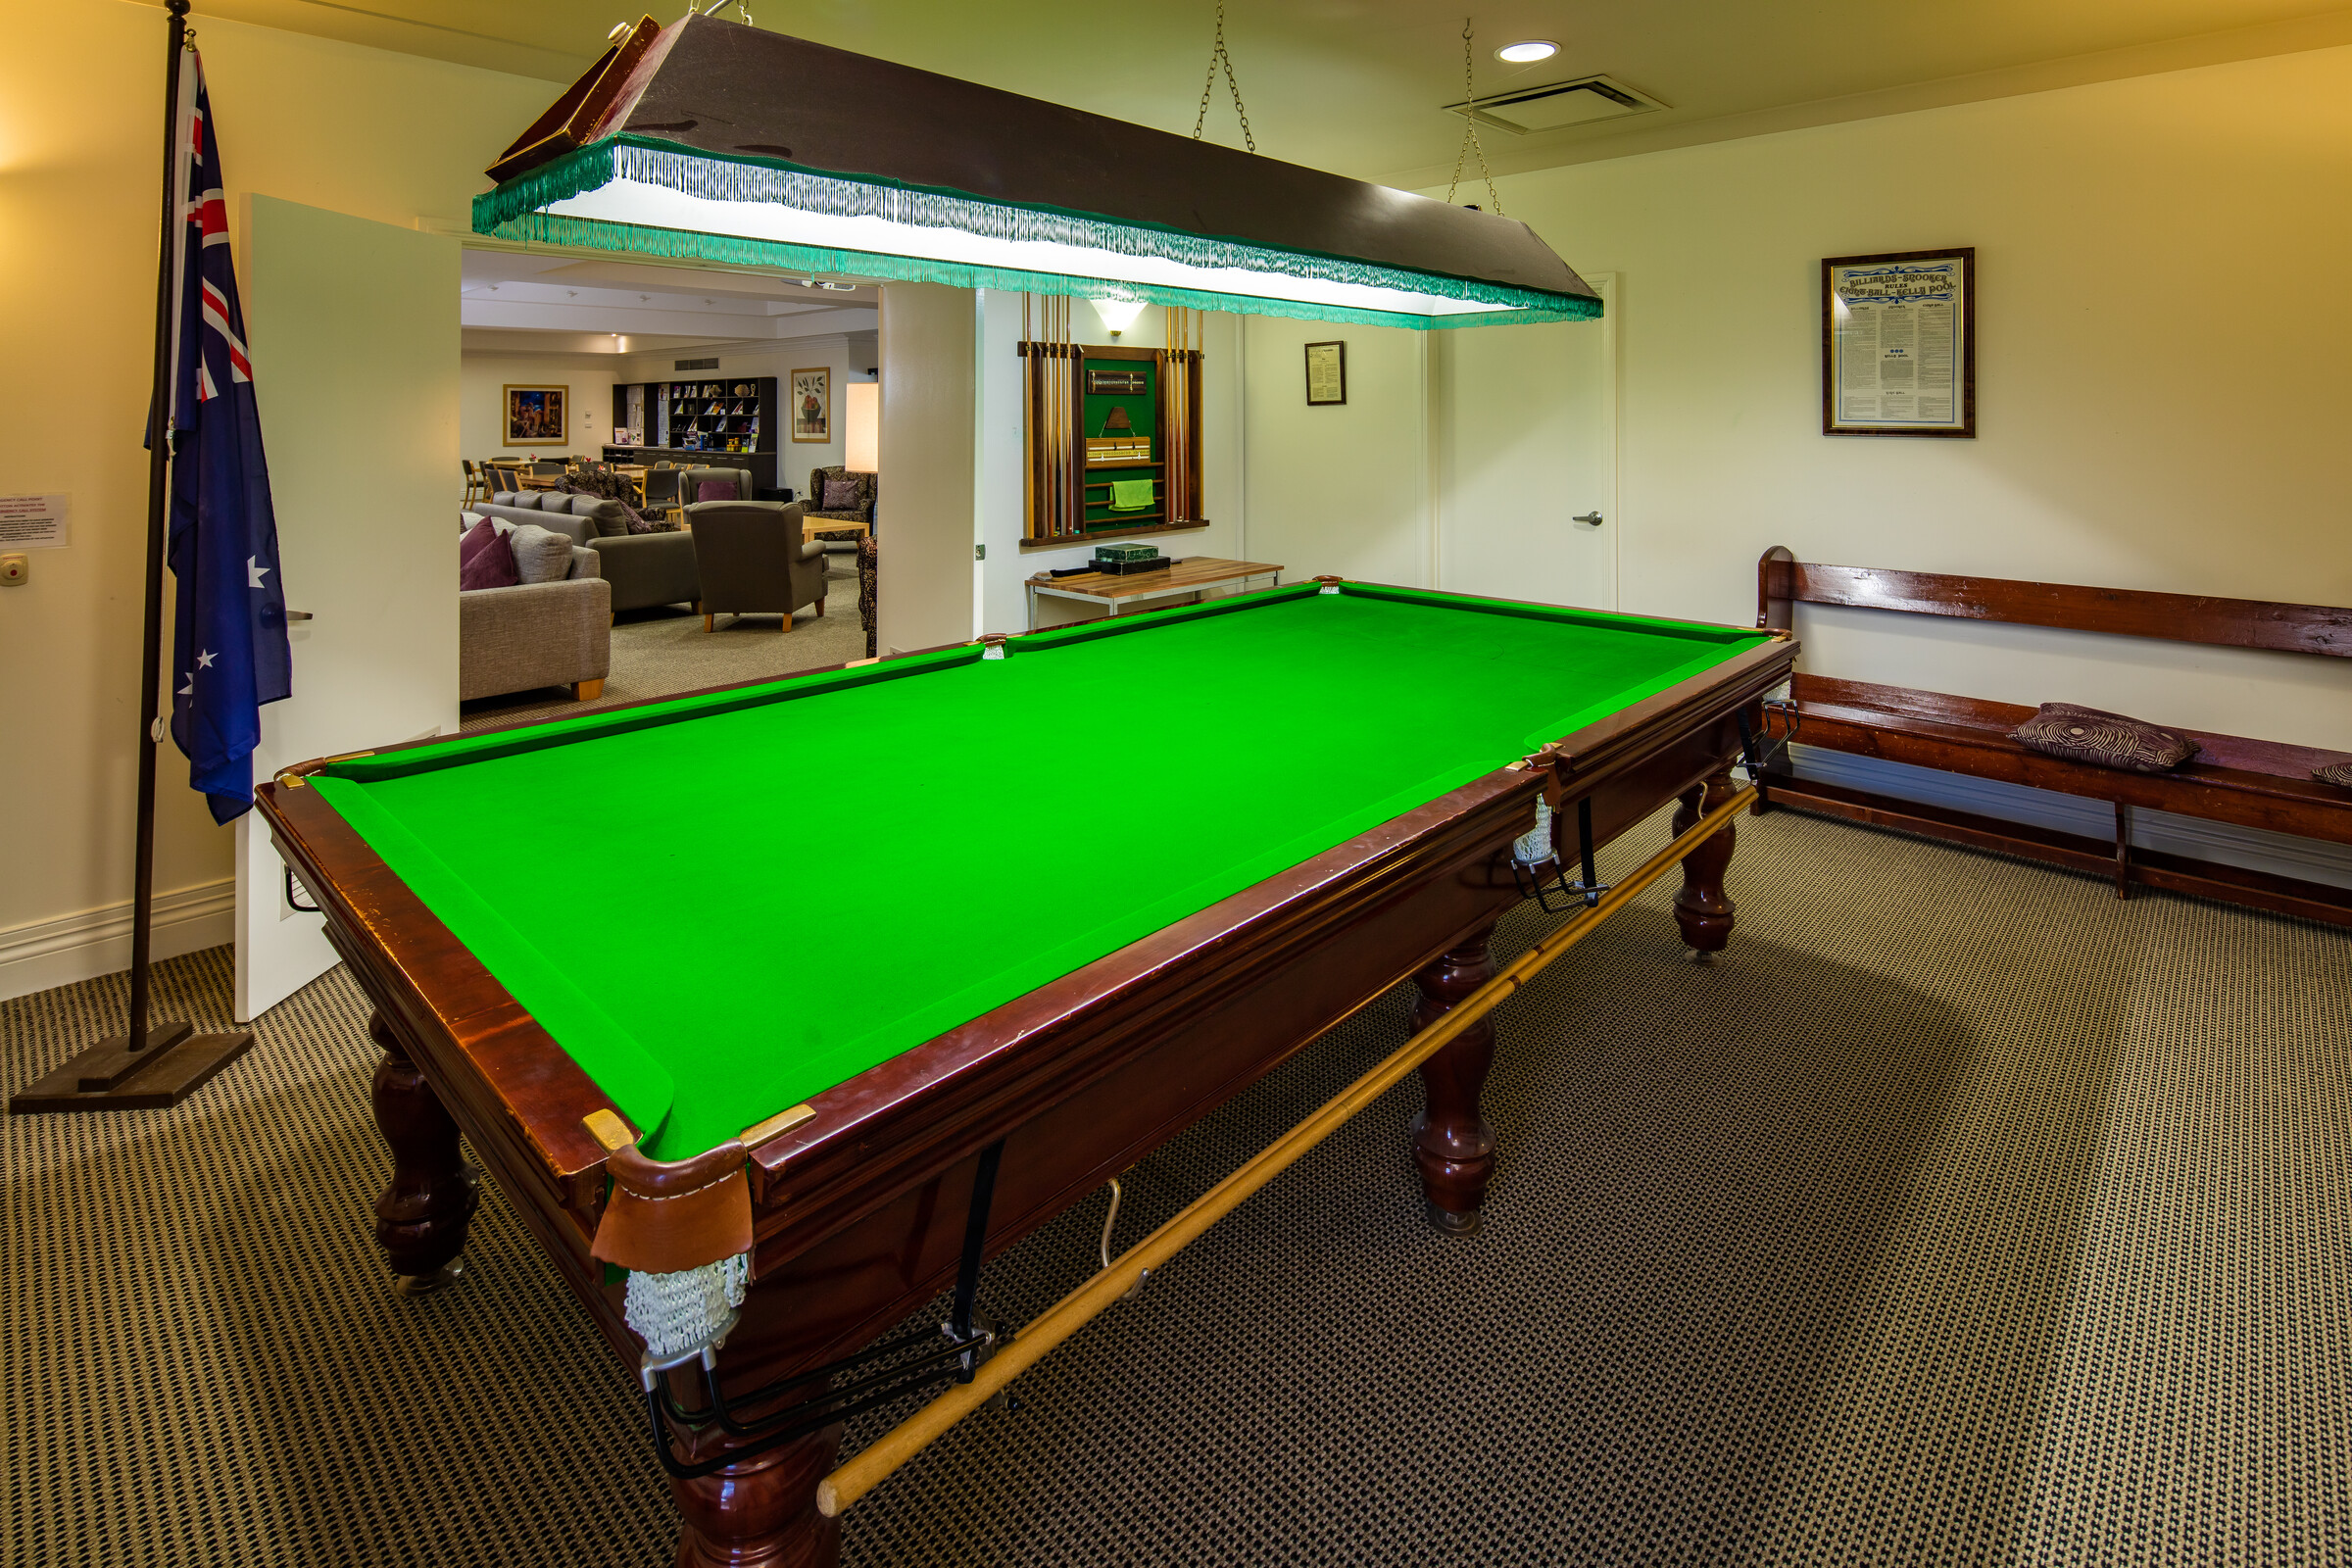 Windsor Park pool table in room next to lounge